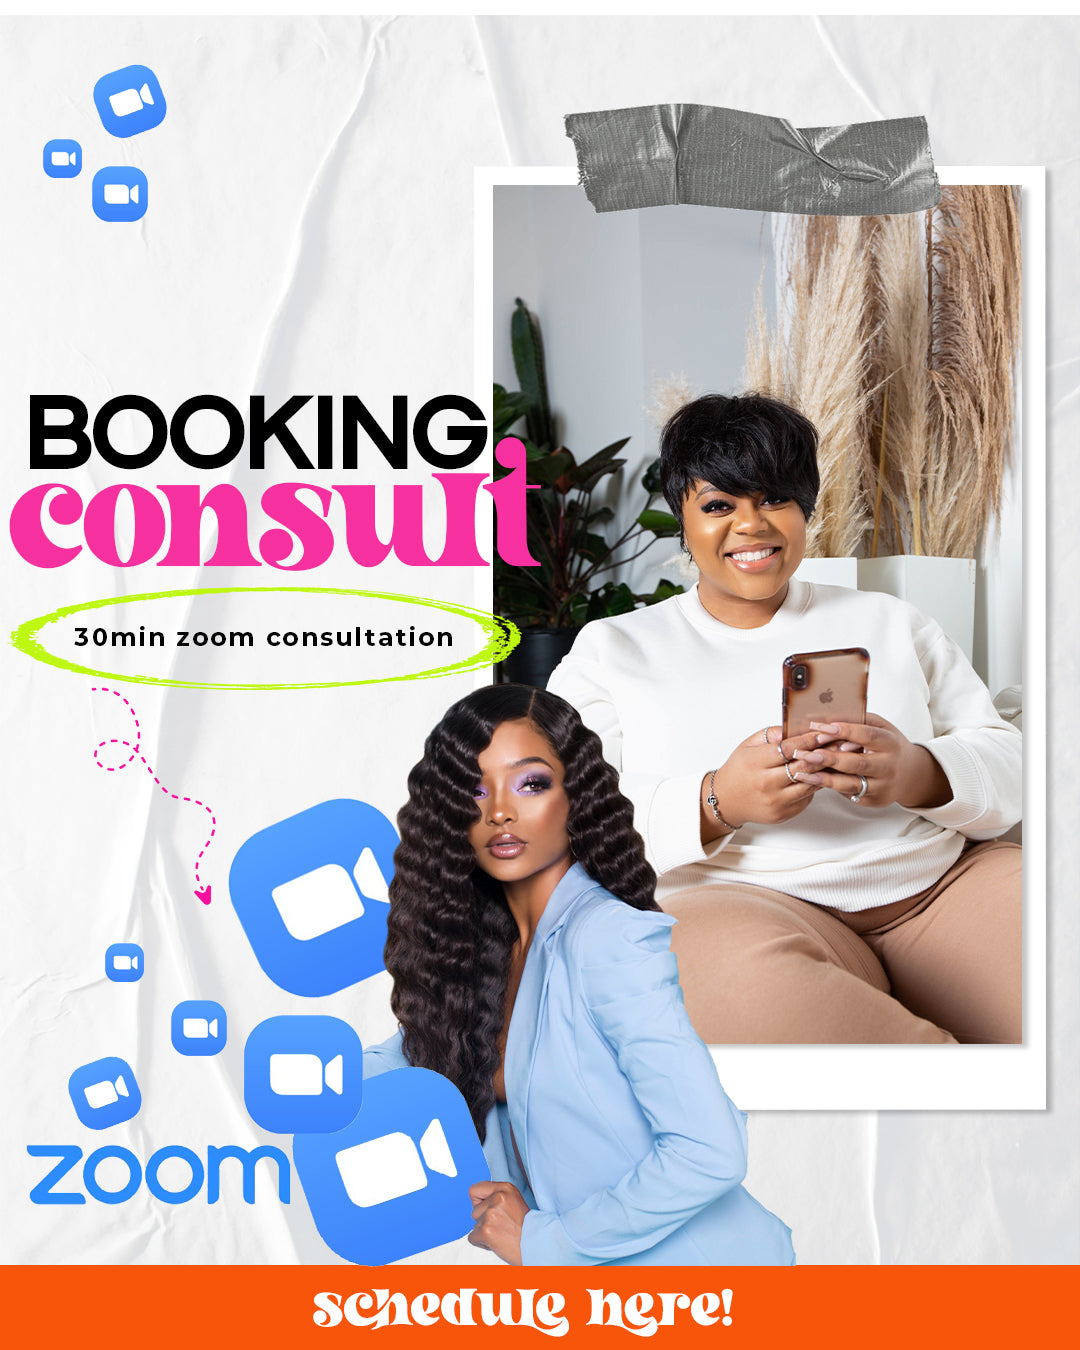 BOOKING CONSULT